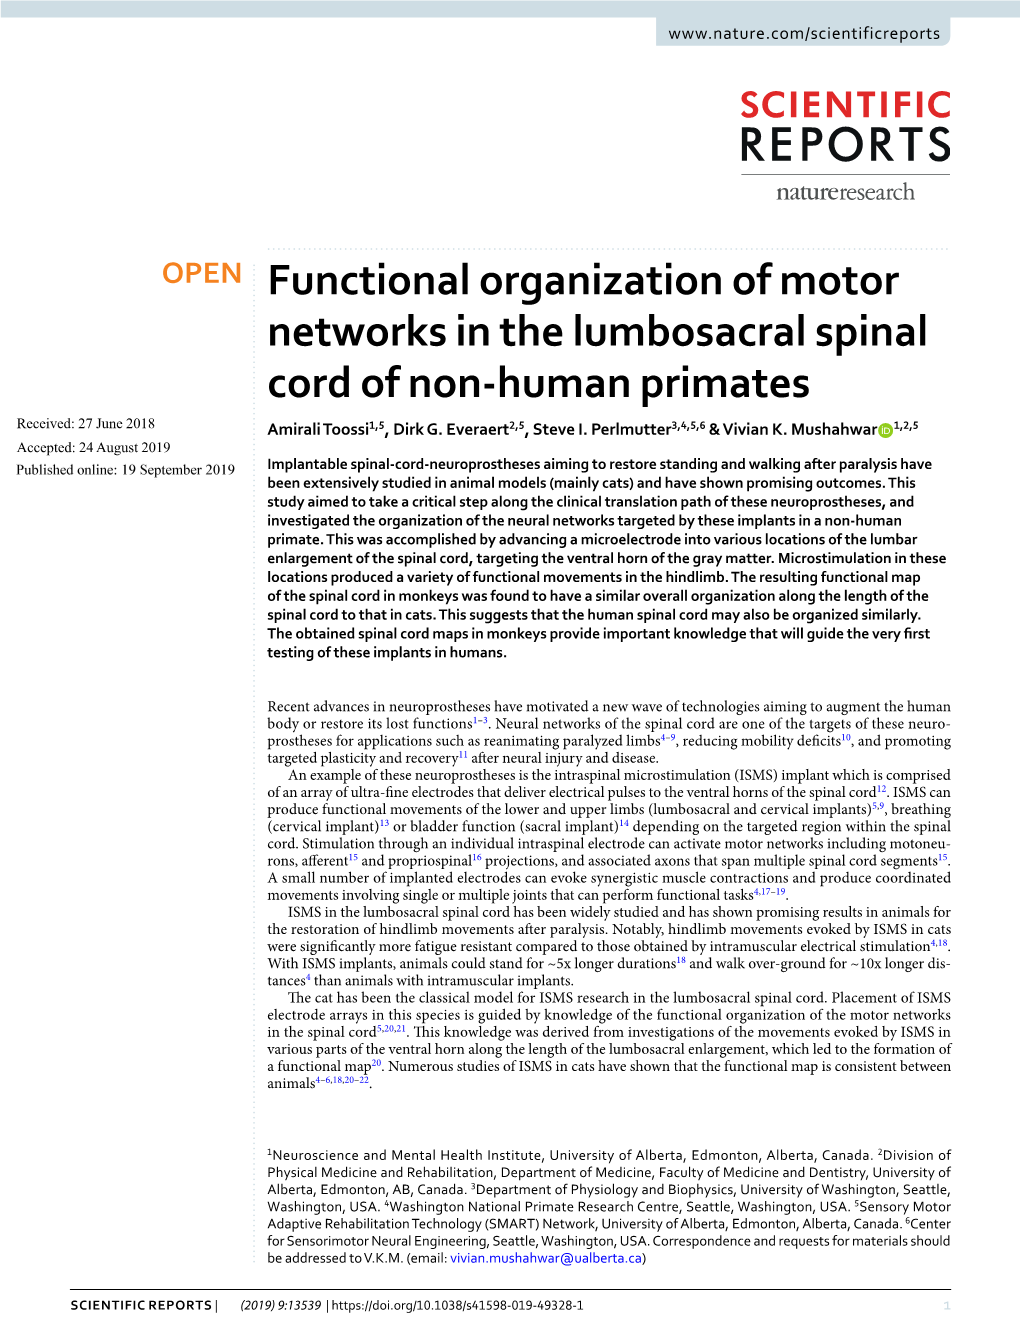 Functional Organization of Motor Networks in the Lumbosacral Spinal Cord of Non-Human Primates Received: 27 June 2018 Amirali Toossi1,5, Dirk G